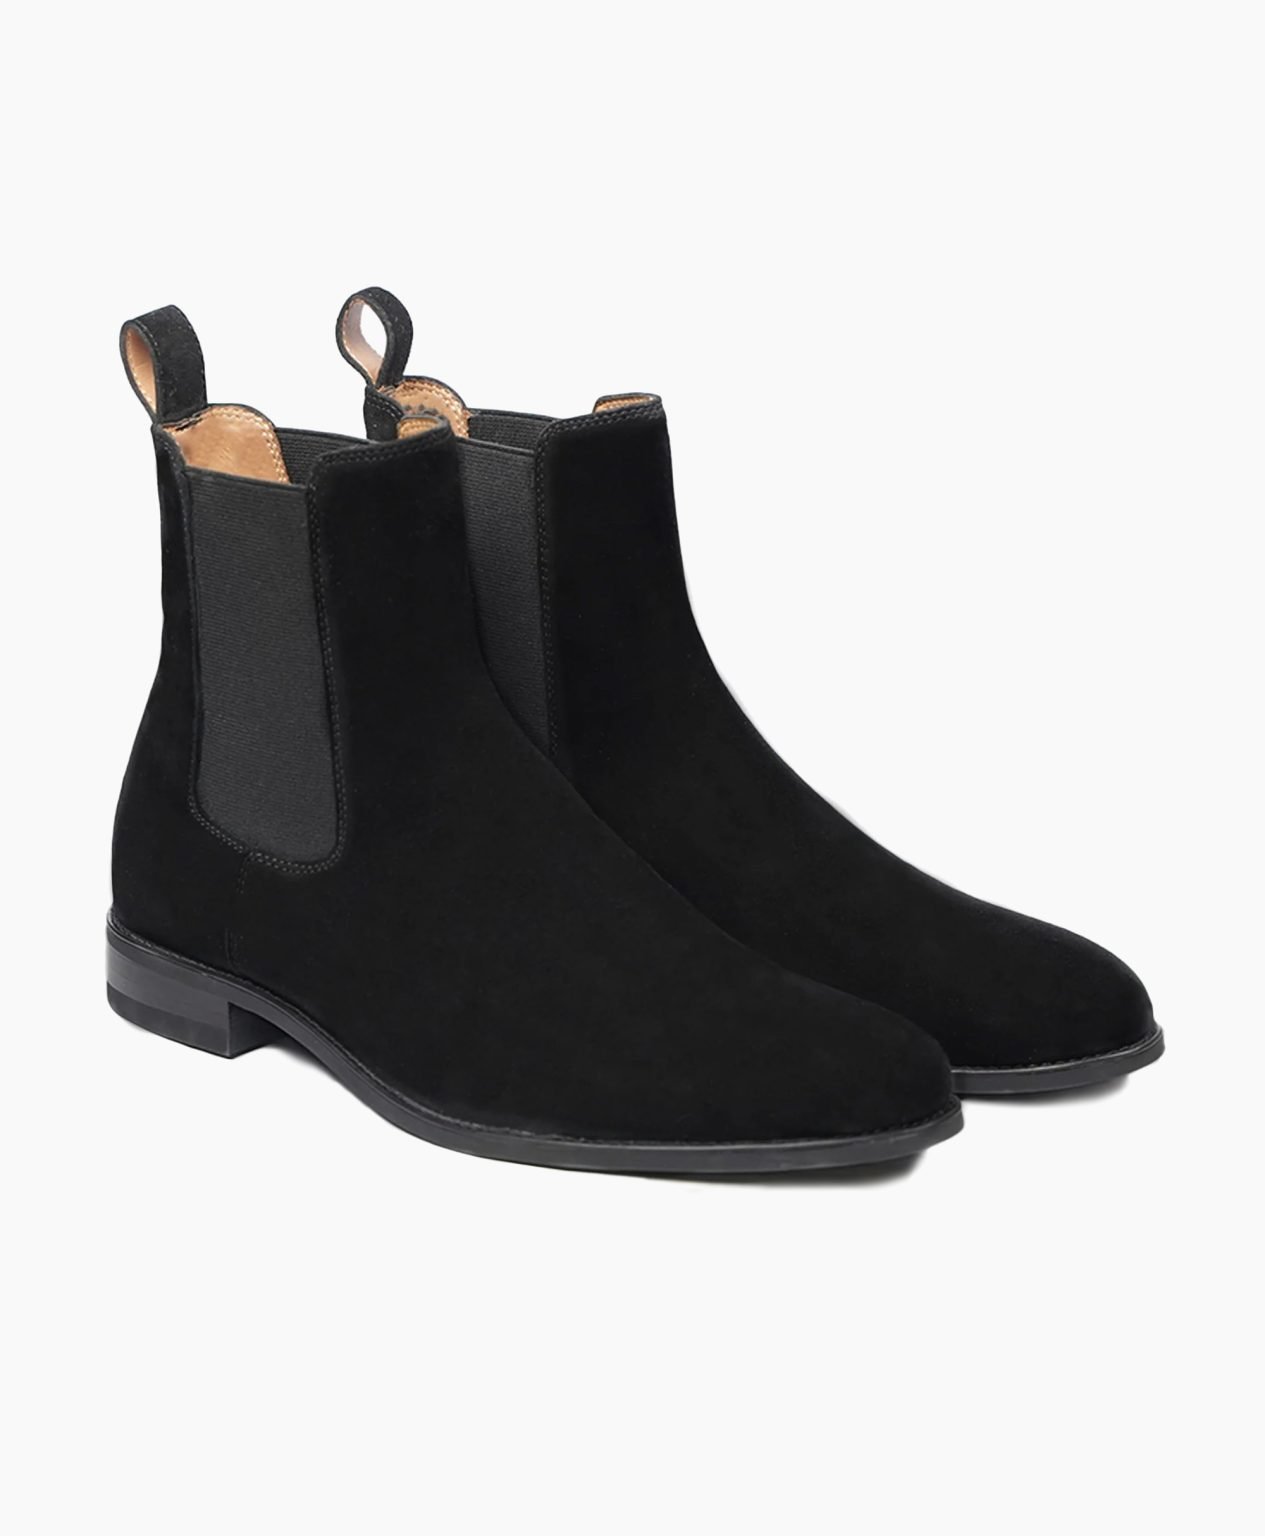 eden-chelsea-black-suede-leather-boot-image200